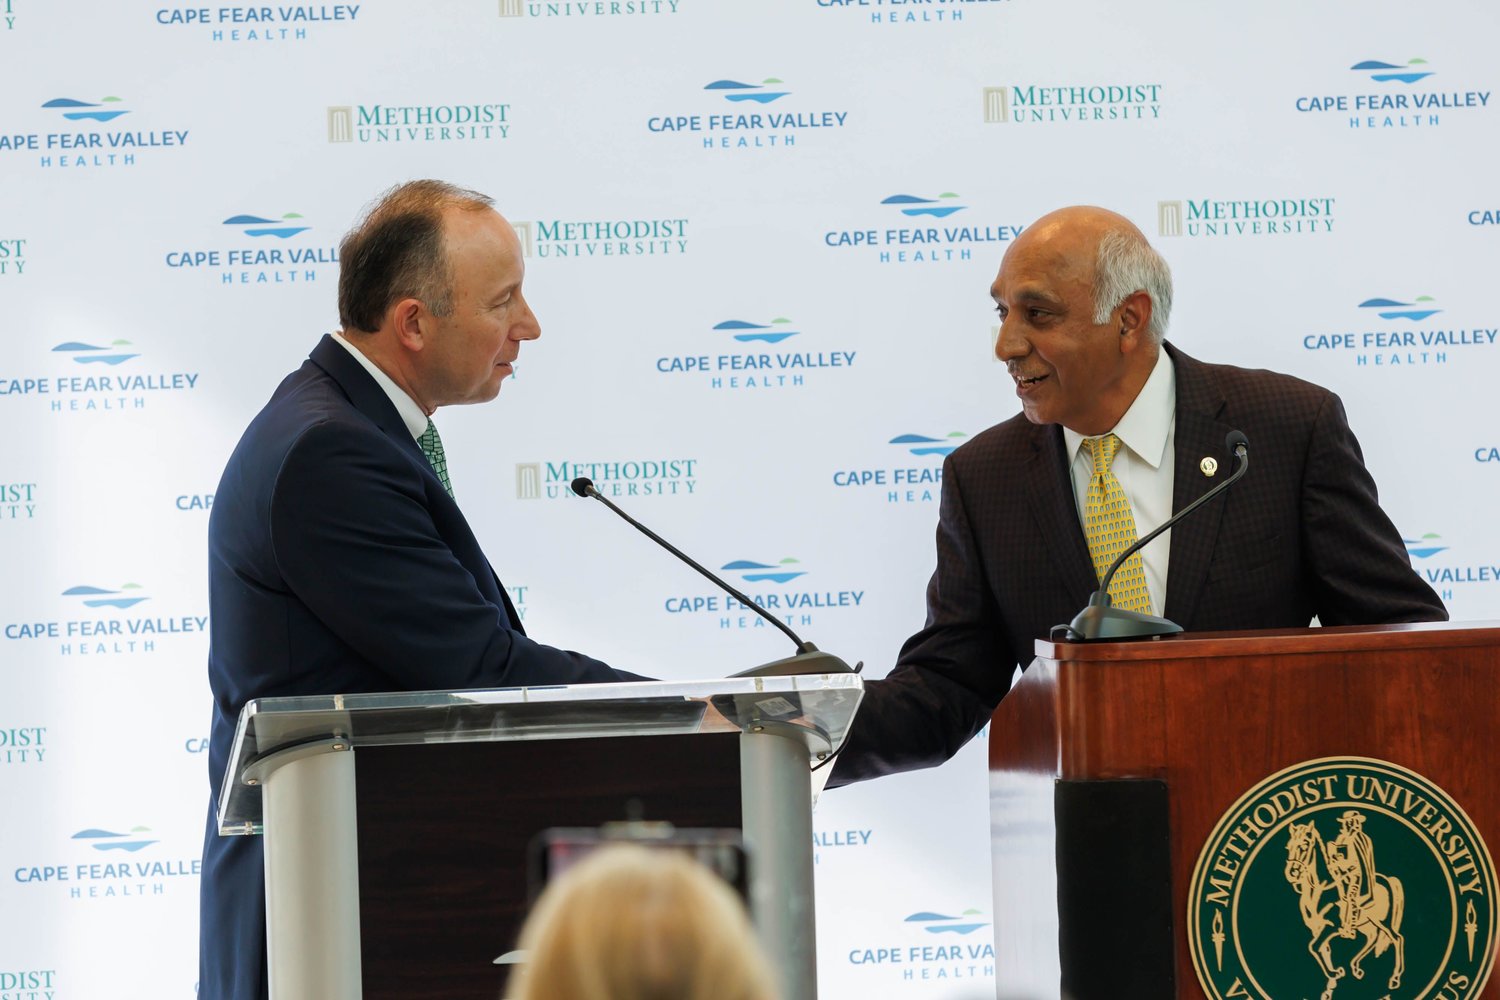 Mike Nagowski, left, CEO of Cape Fear Valley Health, and Dr. Rakesh Gupta, chairman of the Methodist University board of trustees, address a news conference Monday to announce plans to partner on opening a medical school.